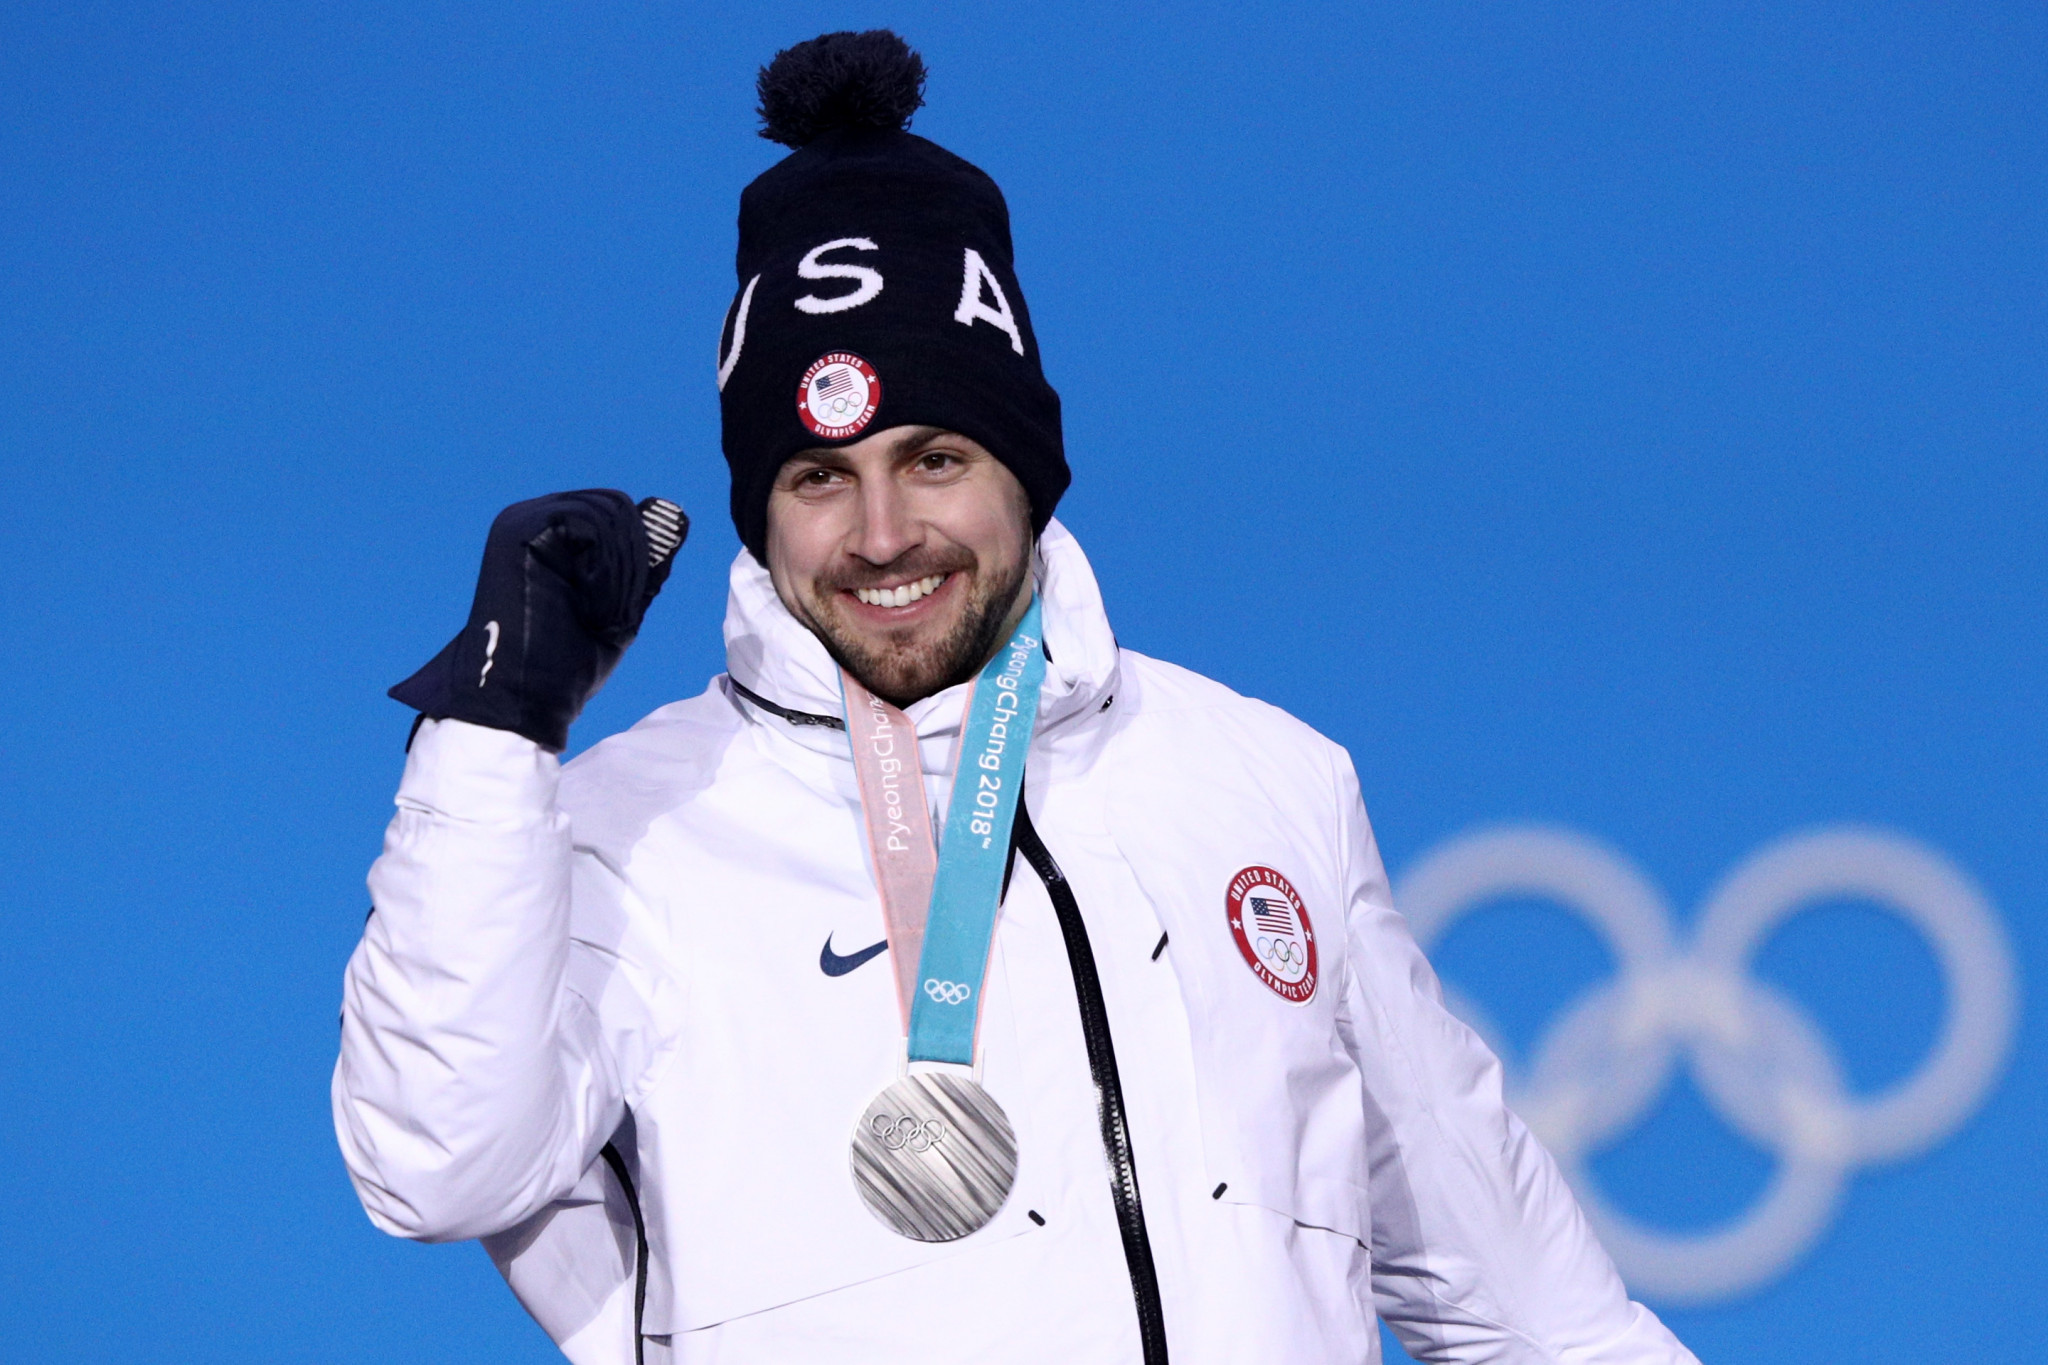 Chris Mazdzer won luge silver at the Pyeongchang 2018 Winter Olympics ©Getty Images